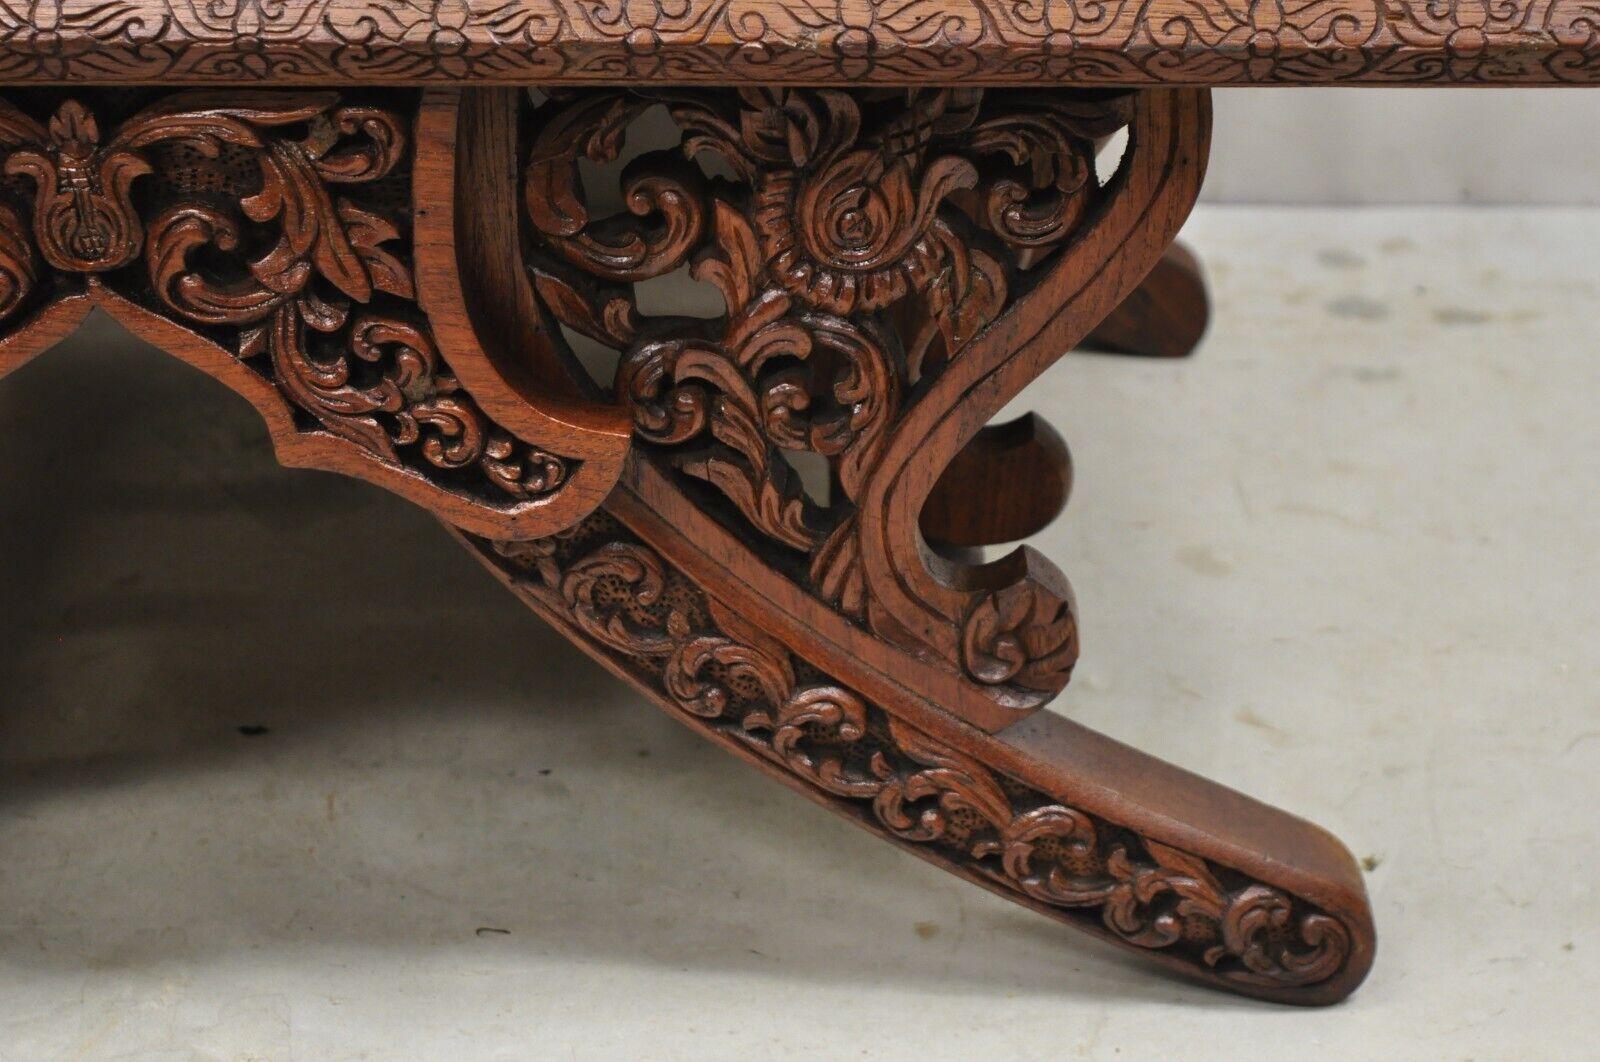 Vintage Chinoiserie Carved Teak Wood Howdah Elephant Saddle Accent Chair For Sale 5